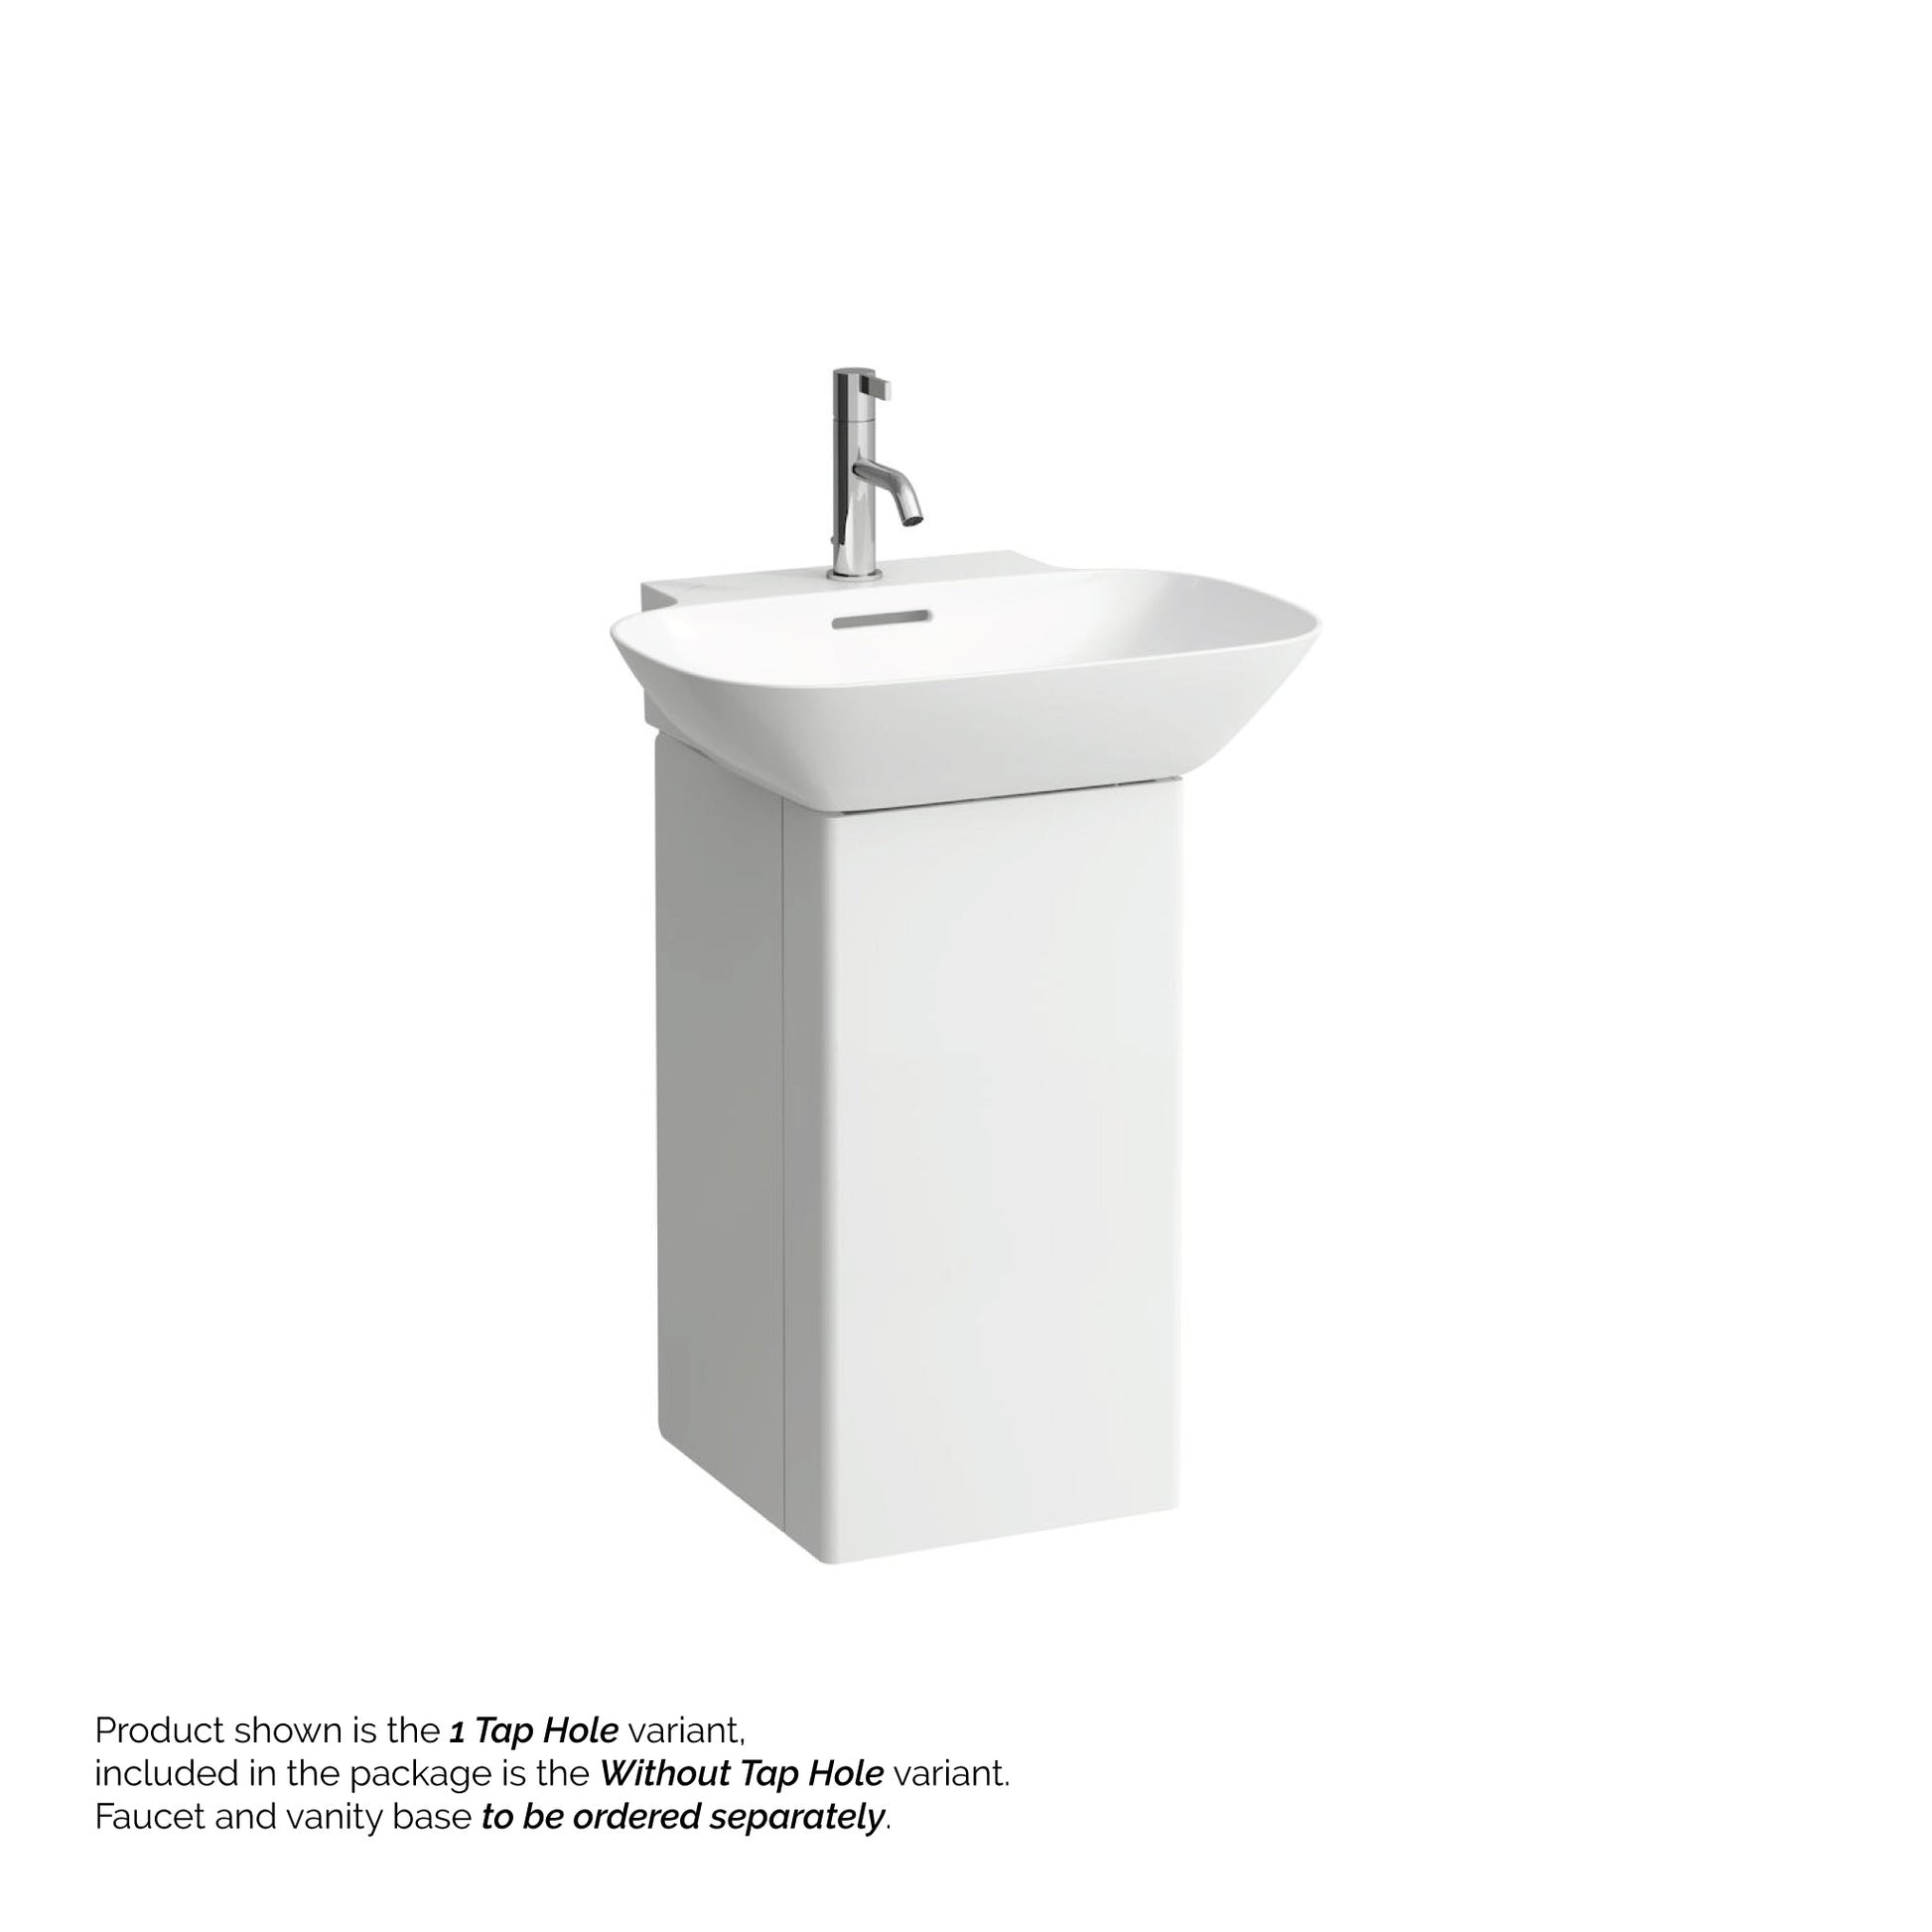 Laufen Ino 22" x 18" Rectangular White Wall-Mounted Bathroom Sink Without Faucet Hole